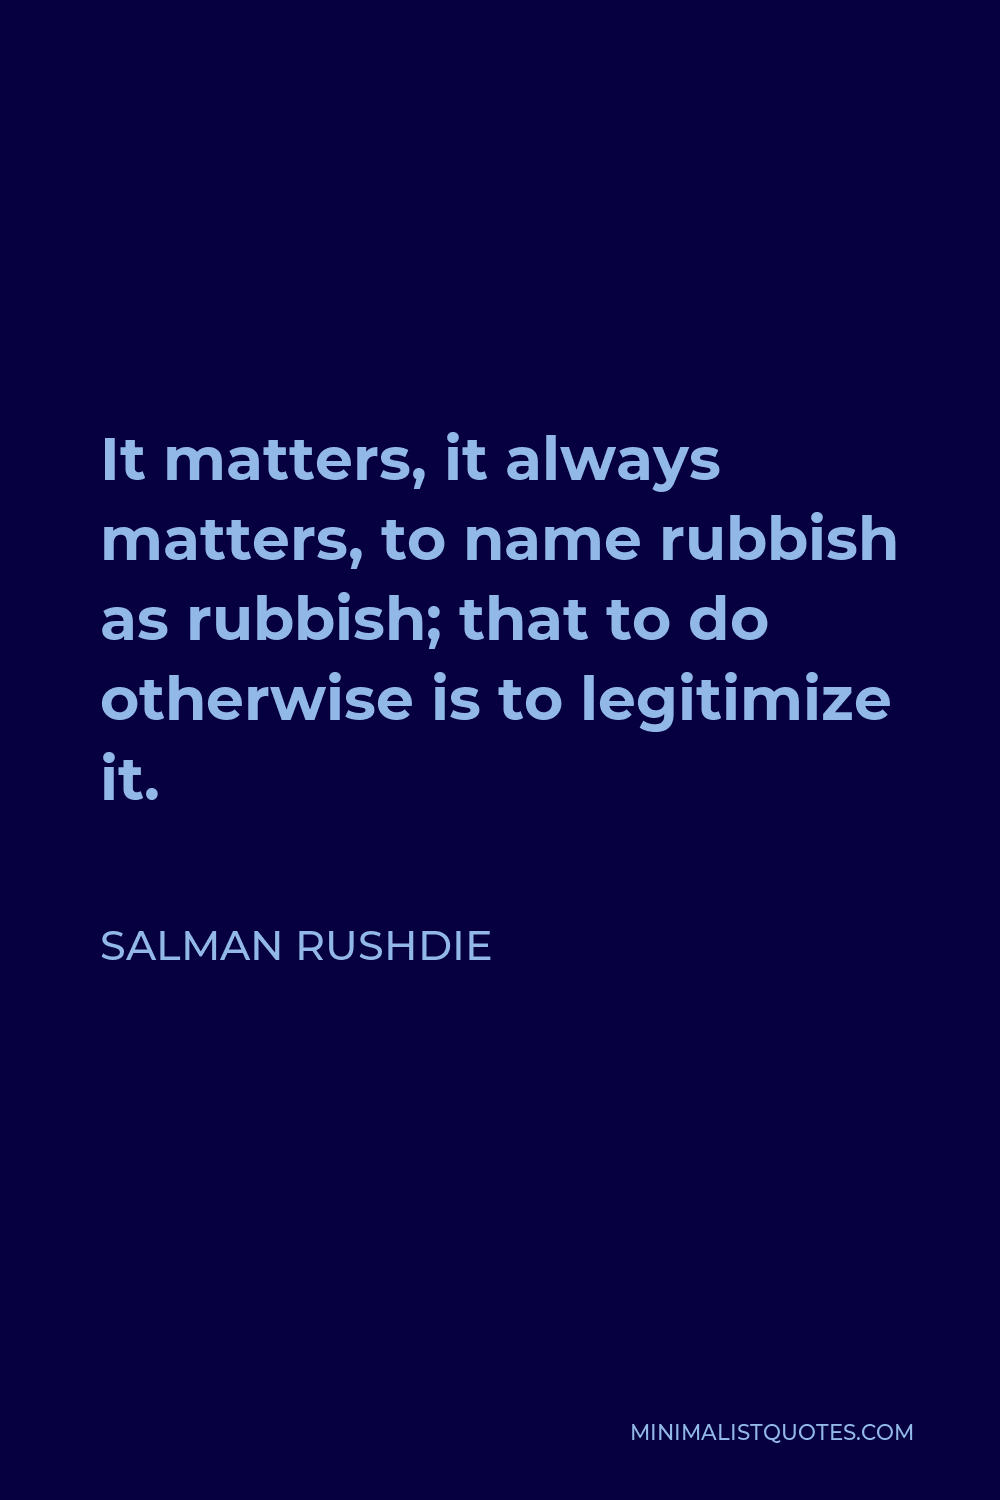 Salman Rushdie Quote - It matters, it always matters, to name rubbish as rubbish; that to do otherwise is to legitimize it.